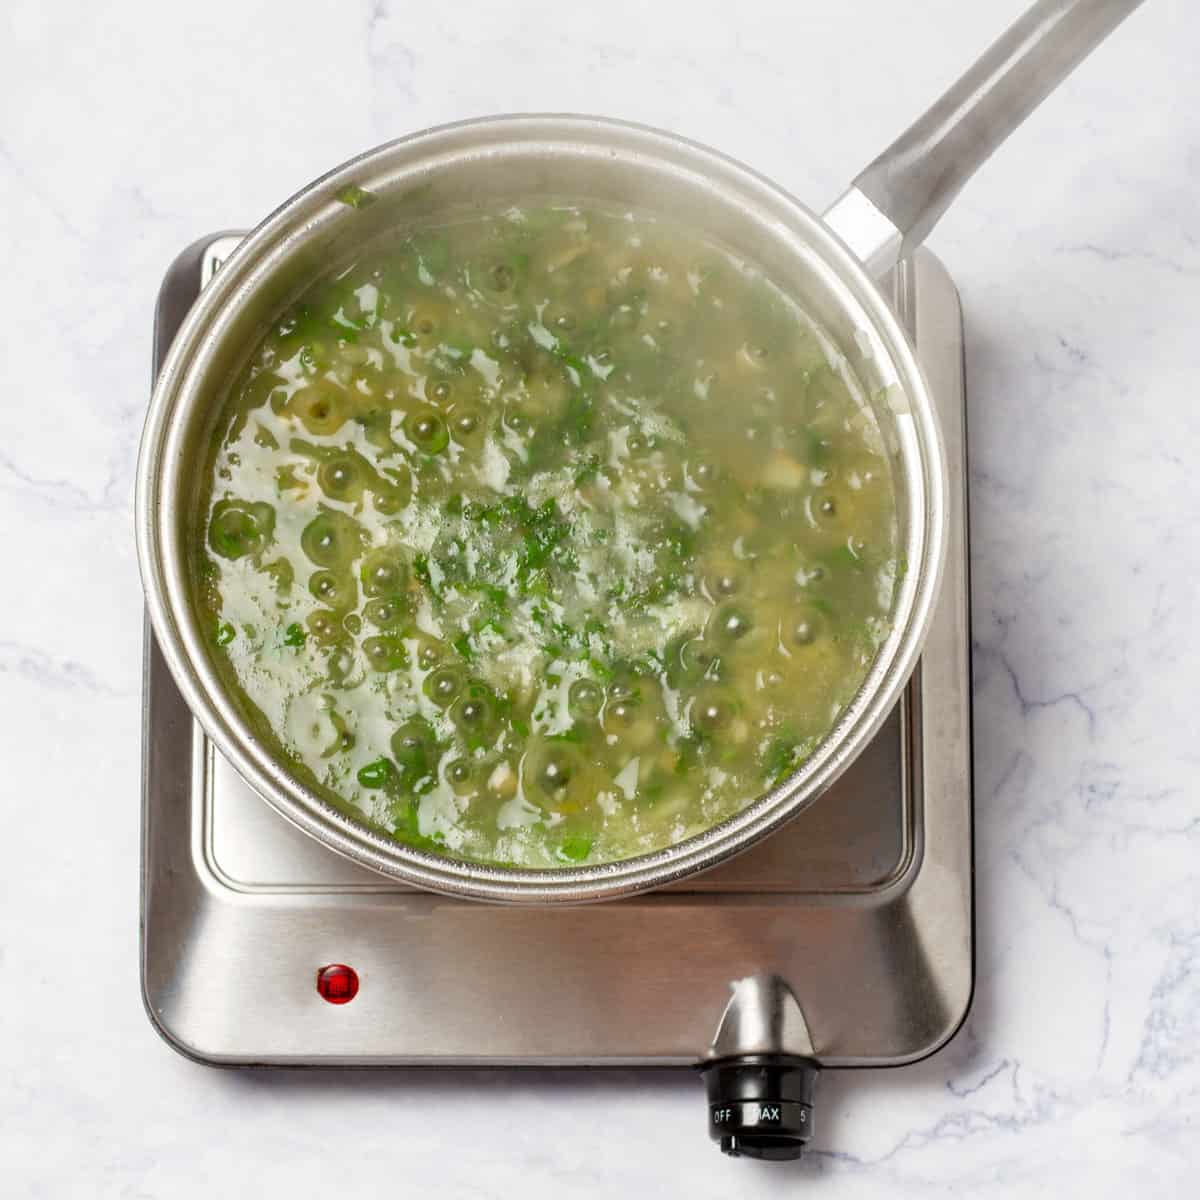 Simmer fish broth, peas, and herbs into a pot 